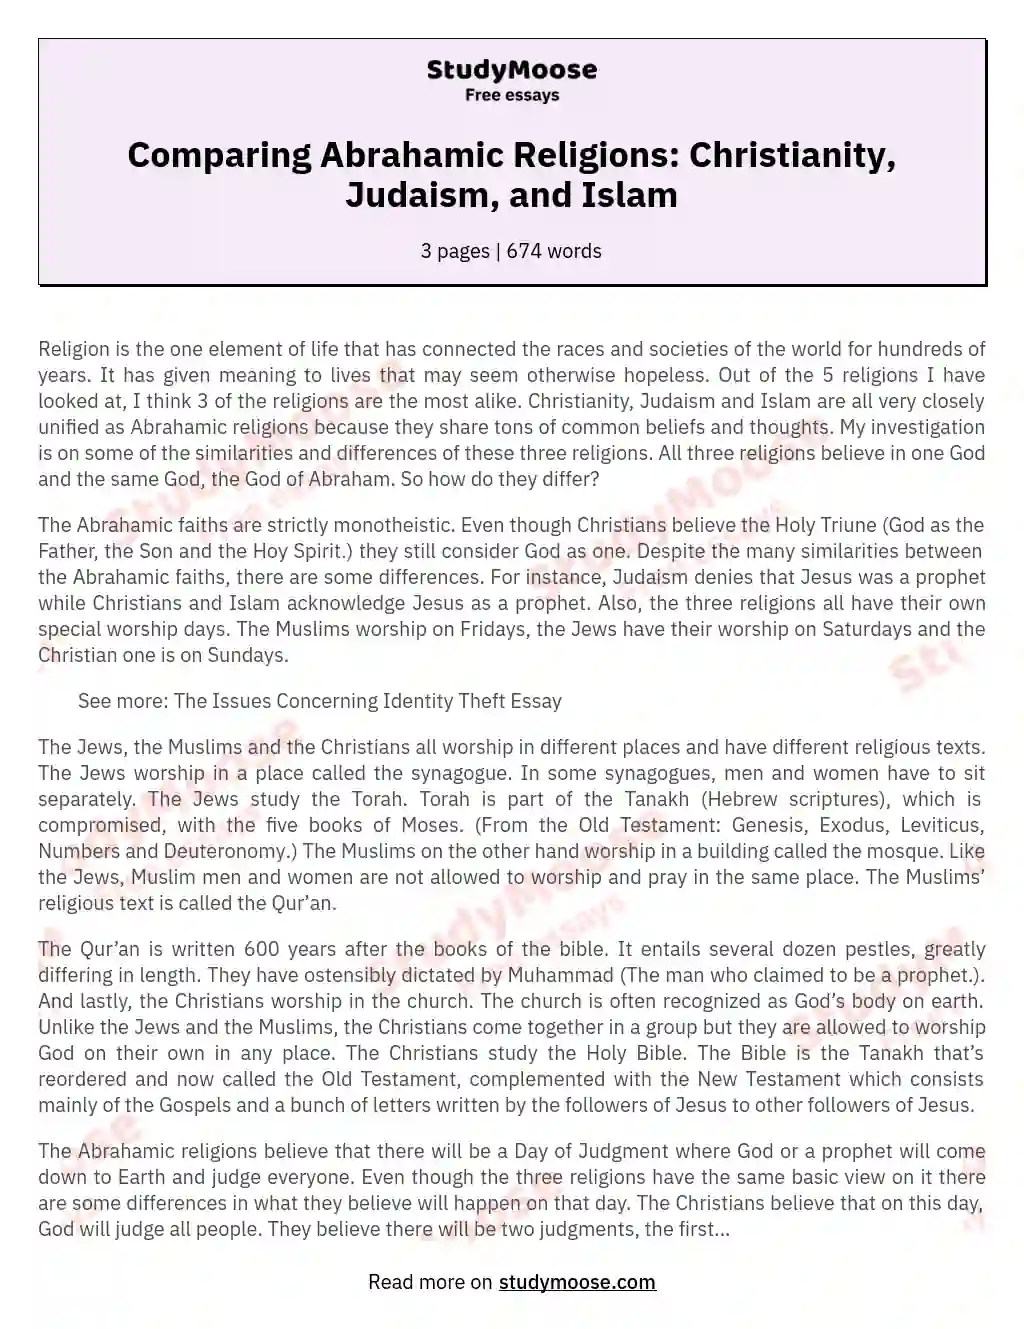 Comparing Abrahamic Religions: Christianity, Judaism, and Islam essay